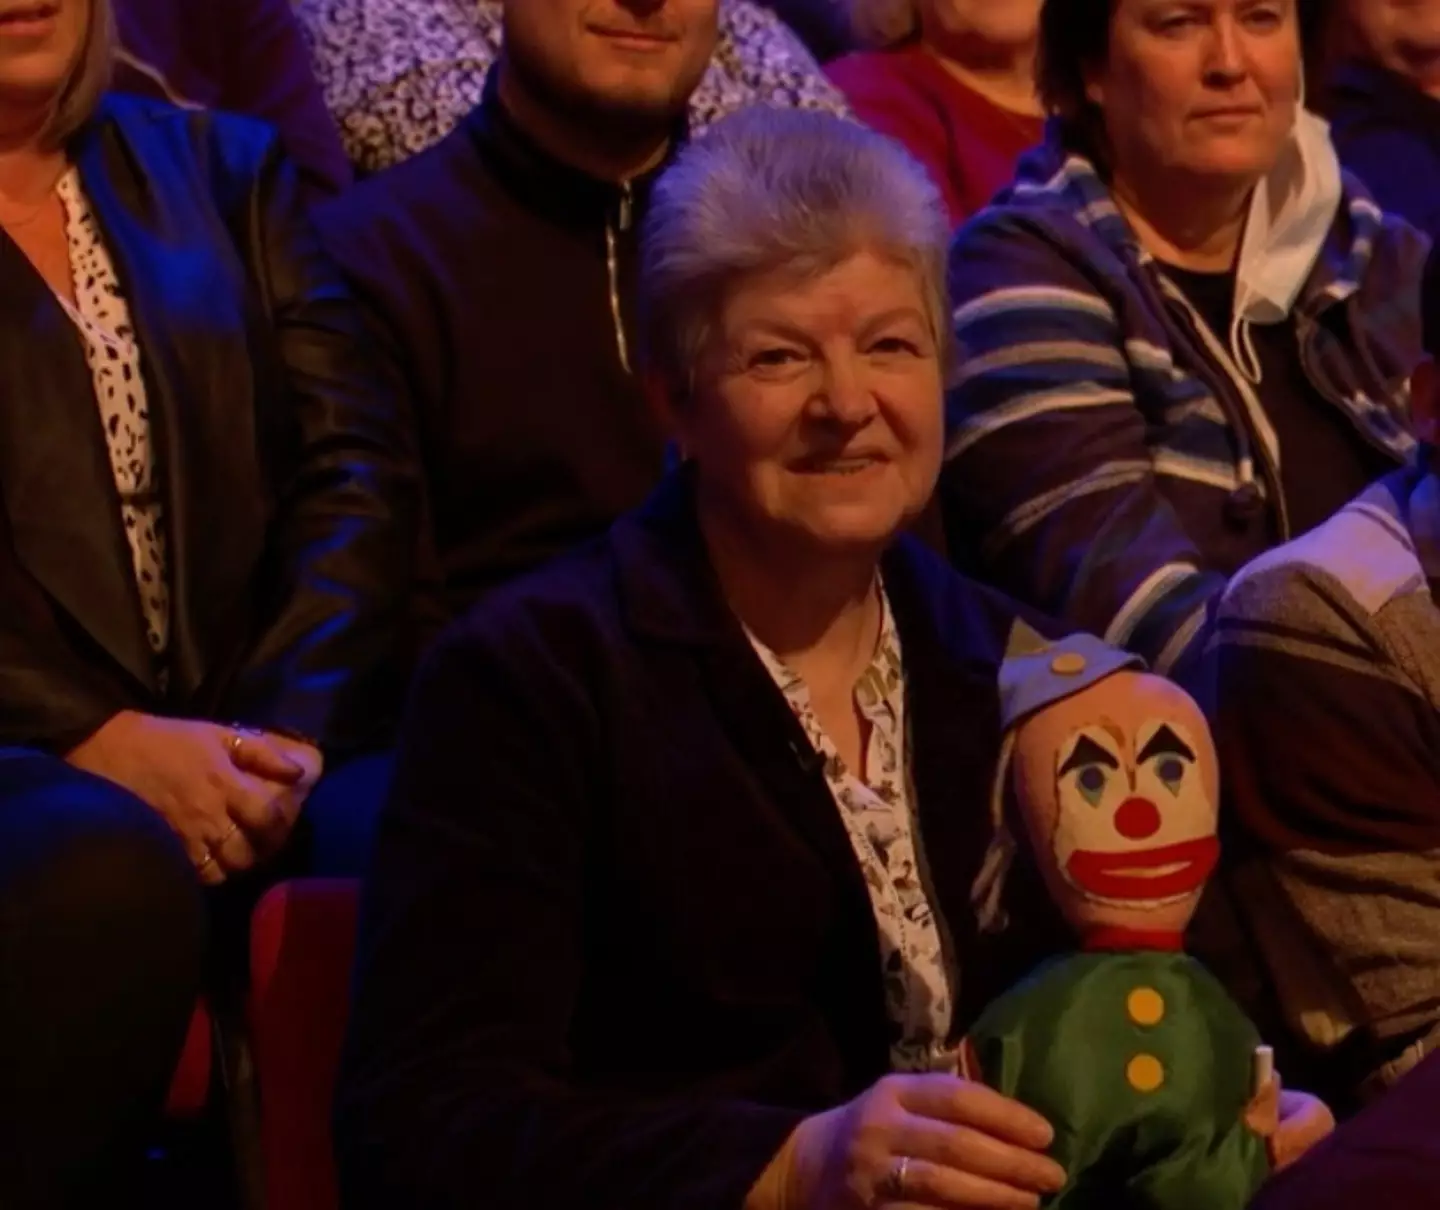 Carol with Bubbles the Clown.